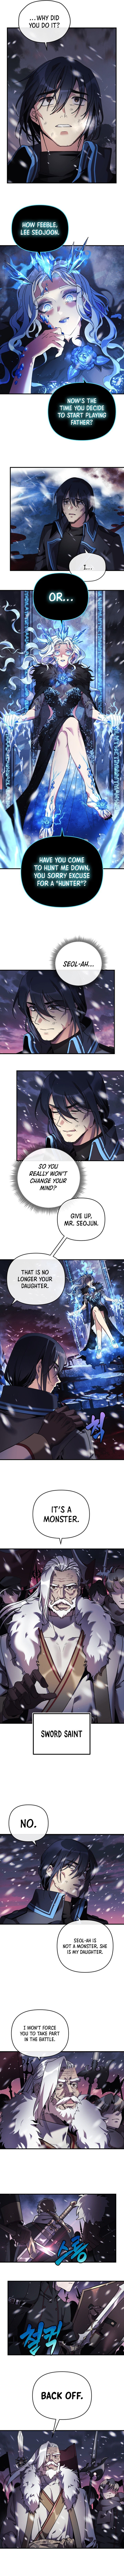 My Daughter is the Final Boss - Chapter 1 Page 3